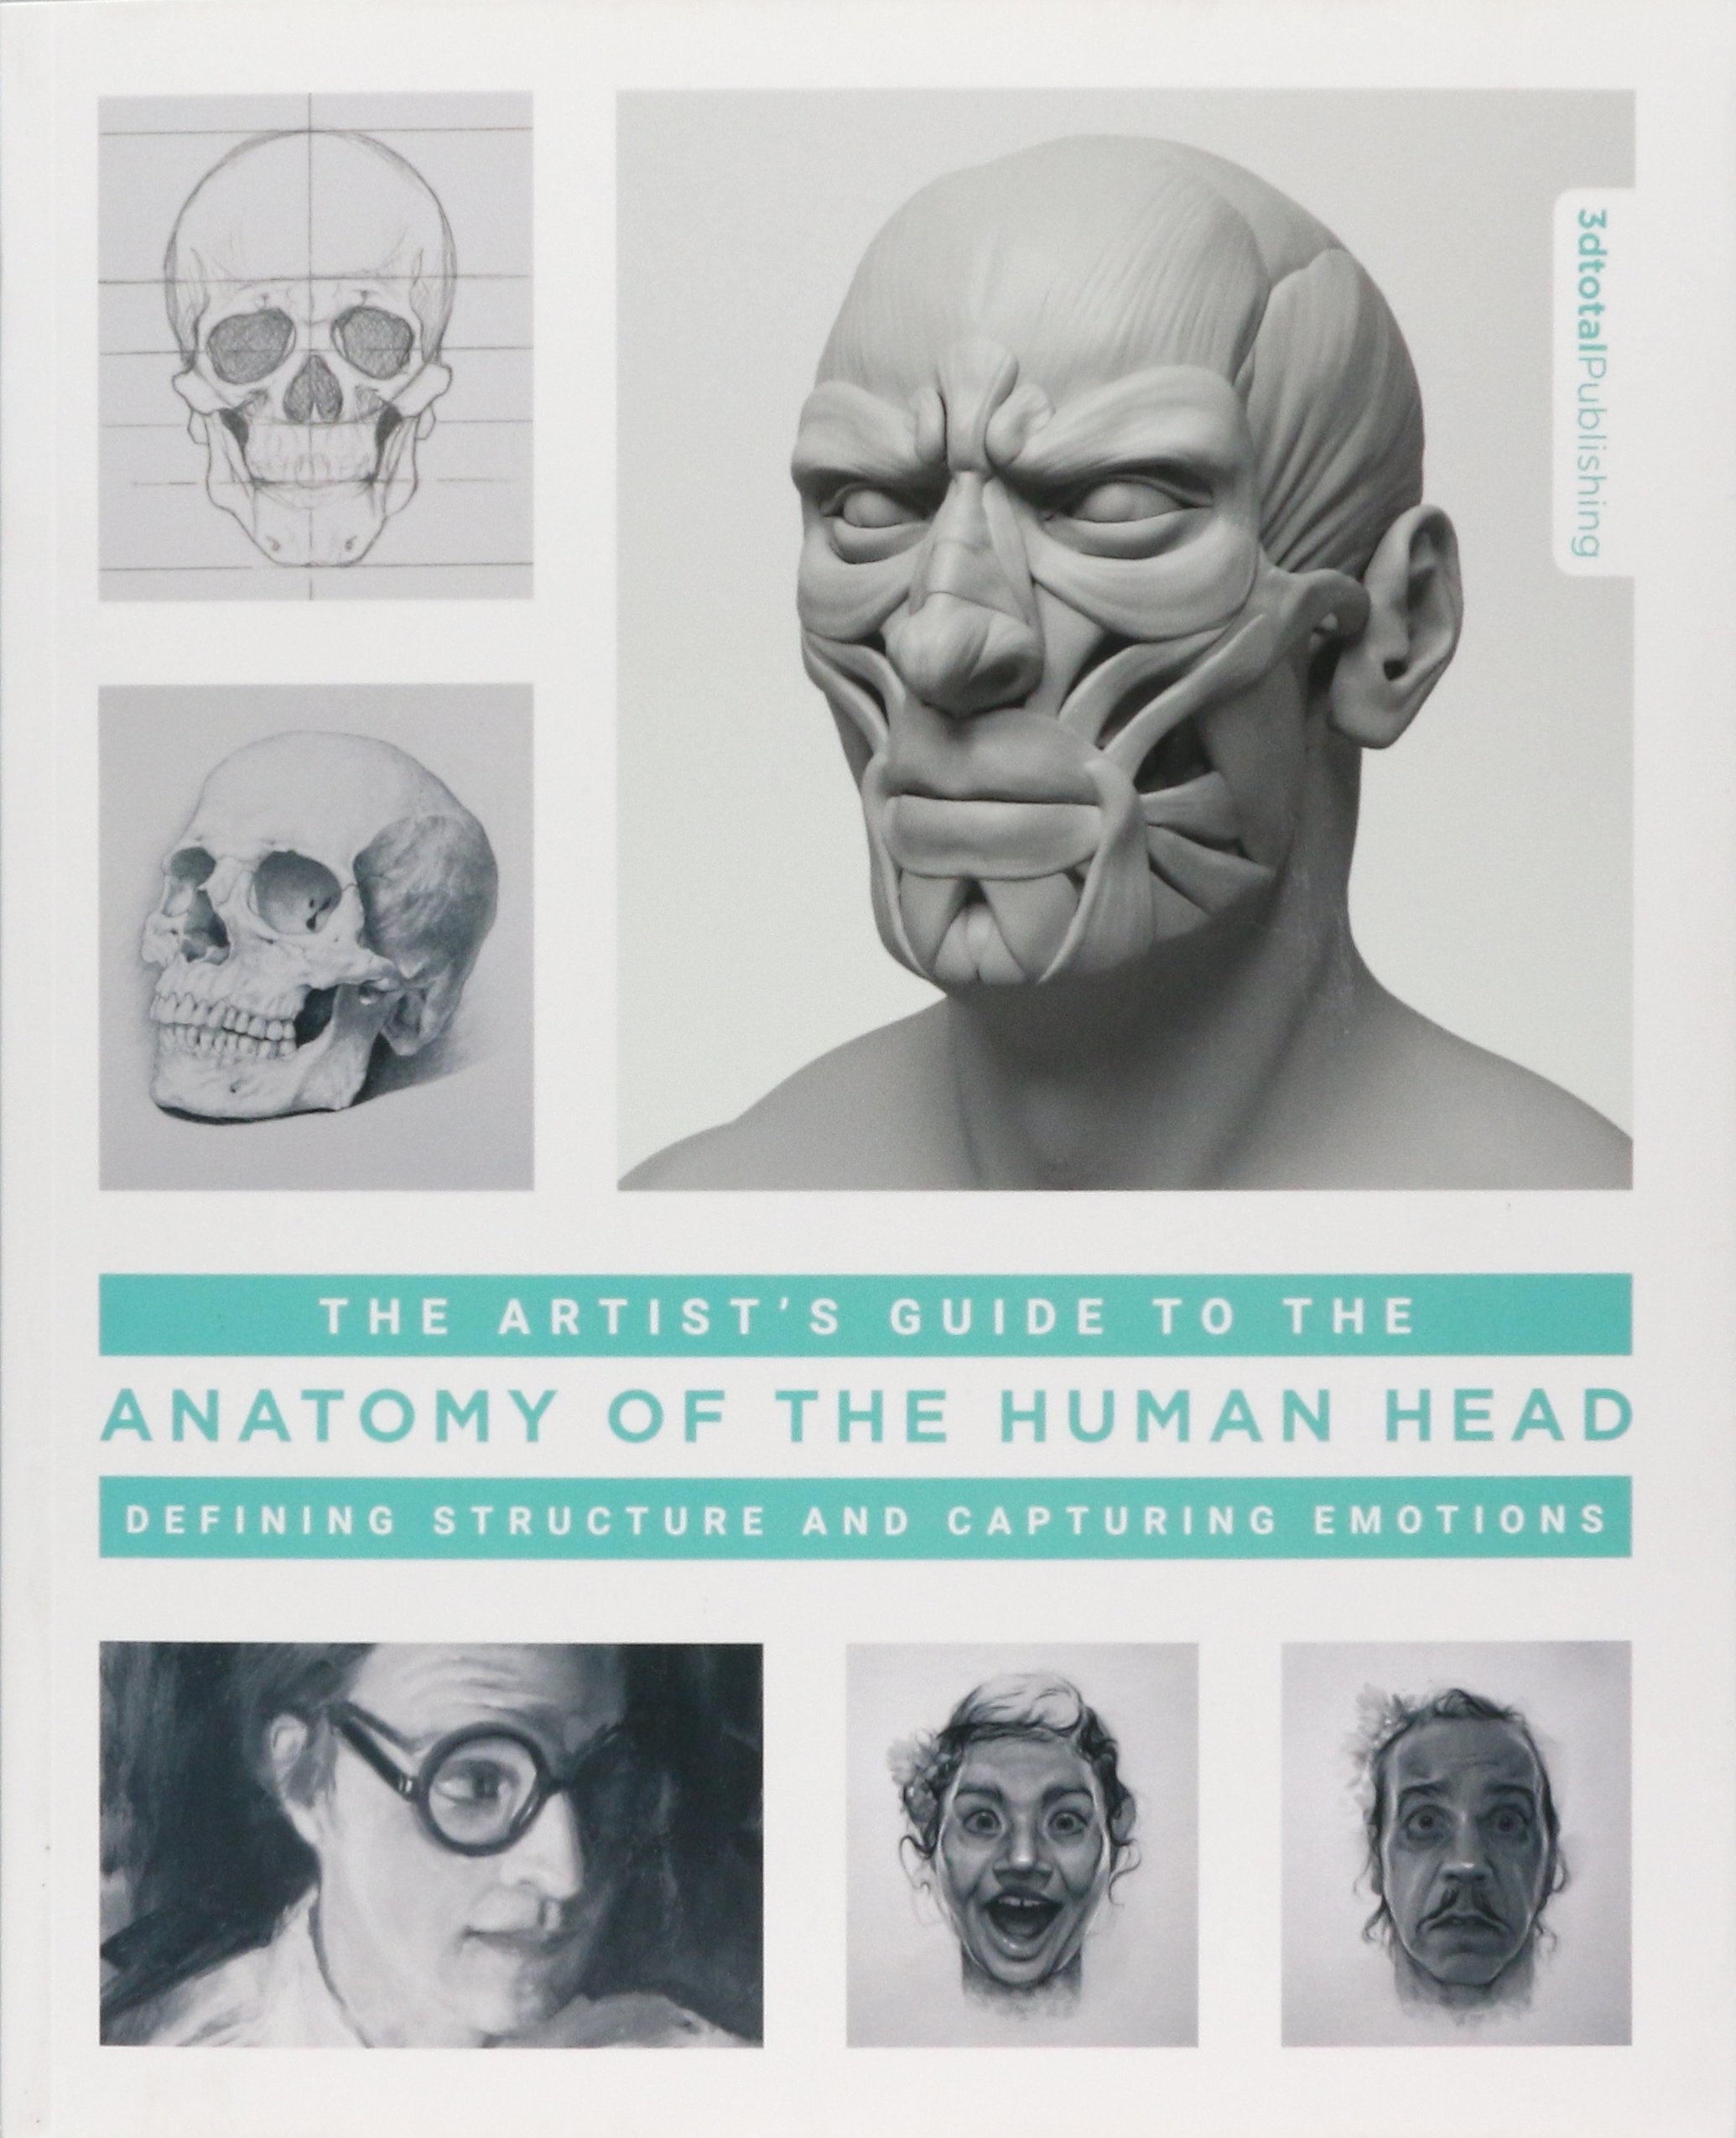 Artist's Guide to the Anatomy of the Human Head |